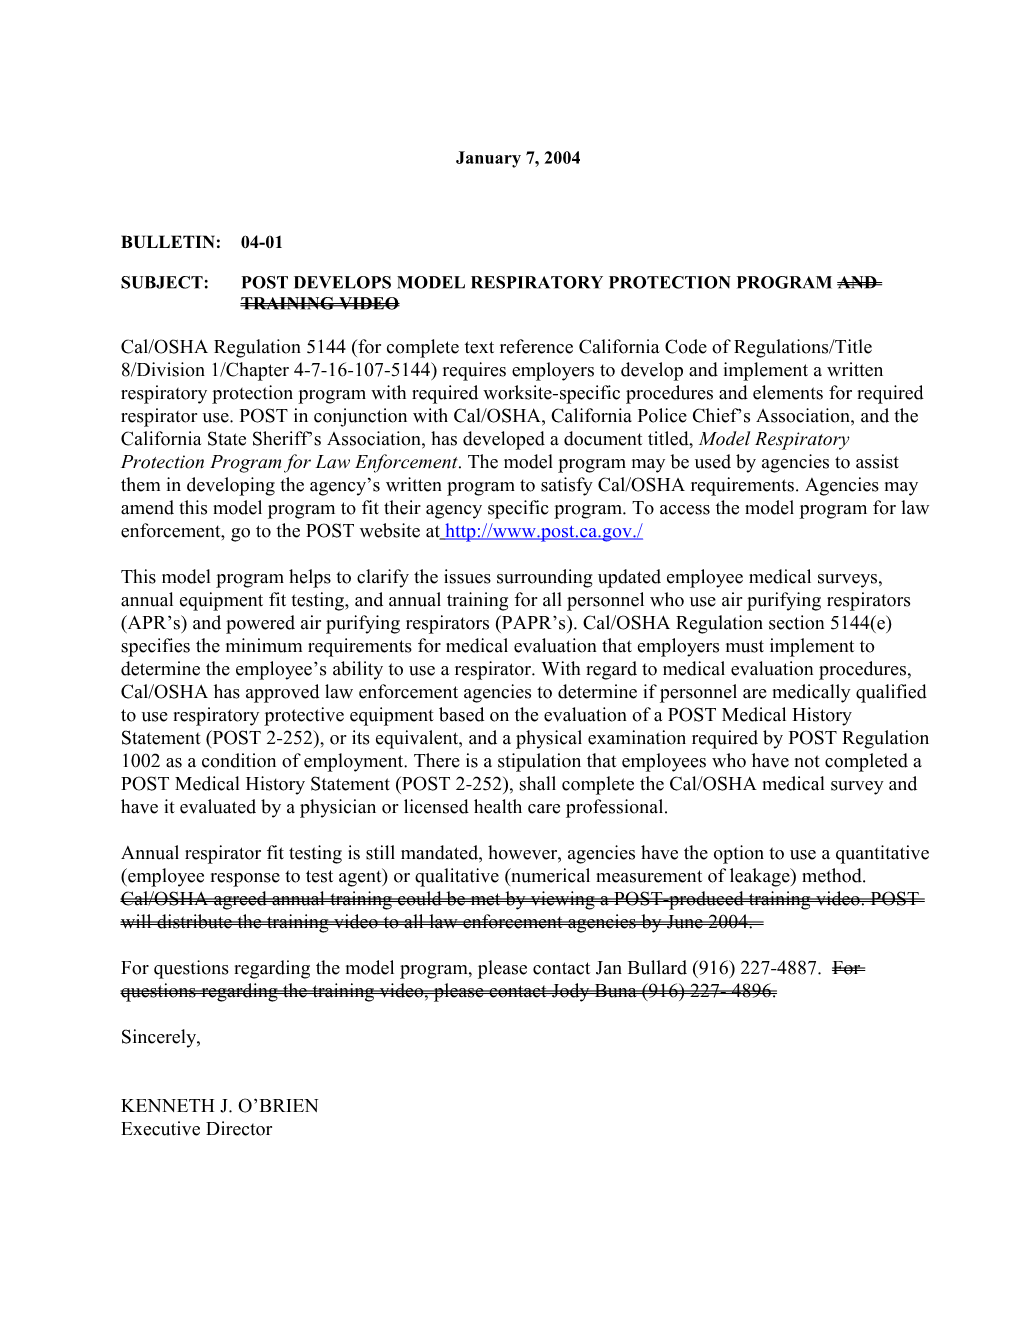 Subject: Post Develops Model Respiratory Protection Program and Training Video